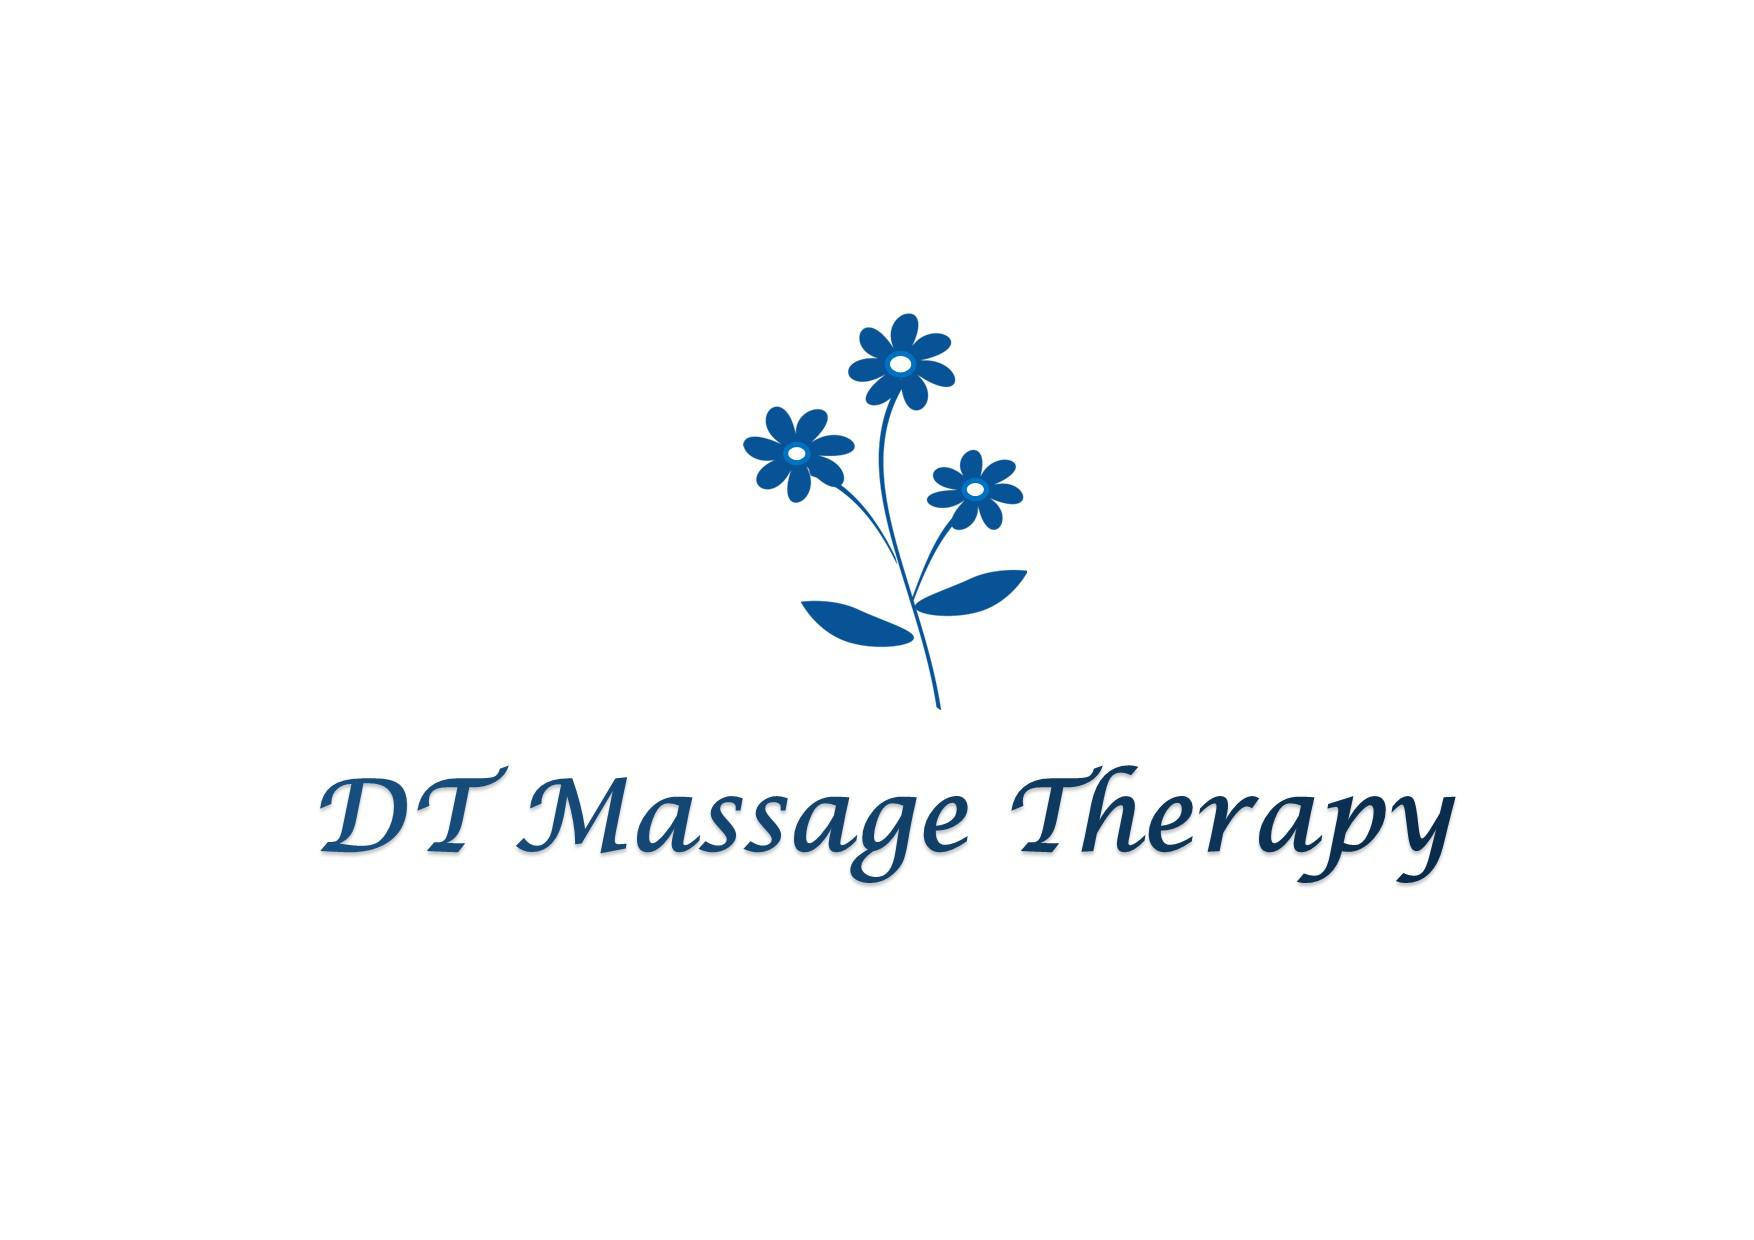 DT Massage Therapy Logo